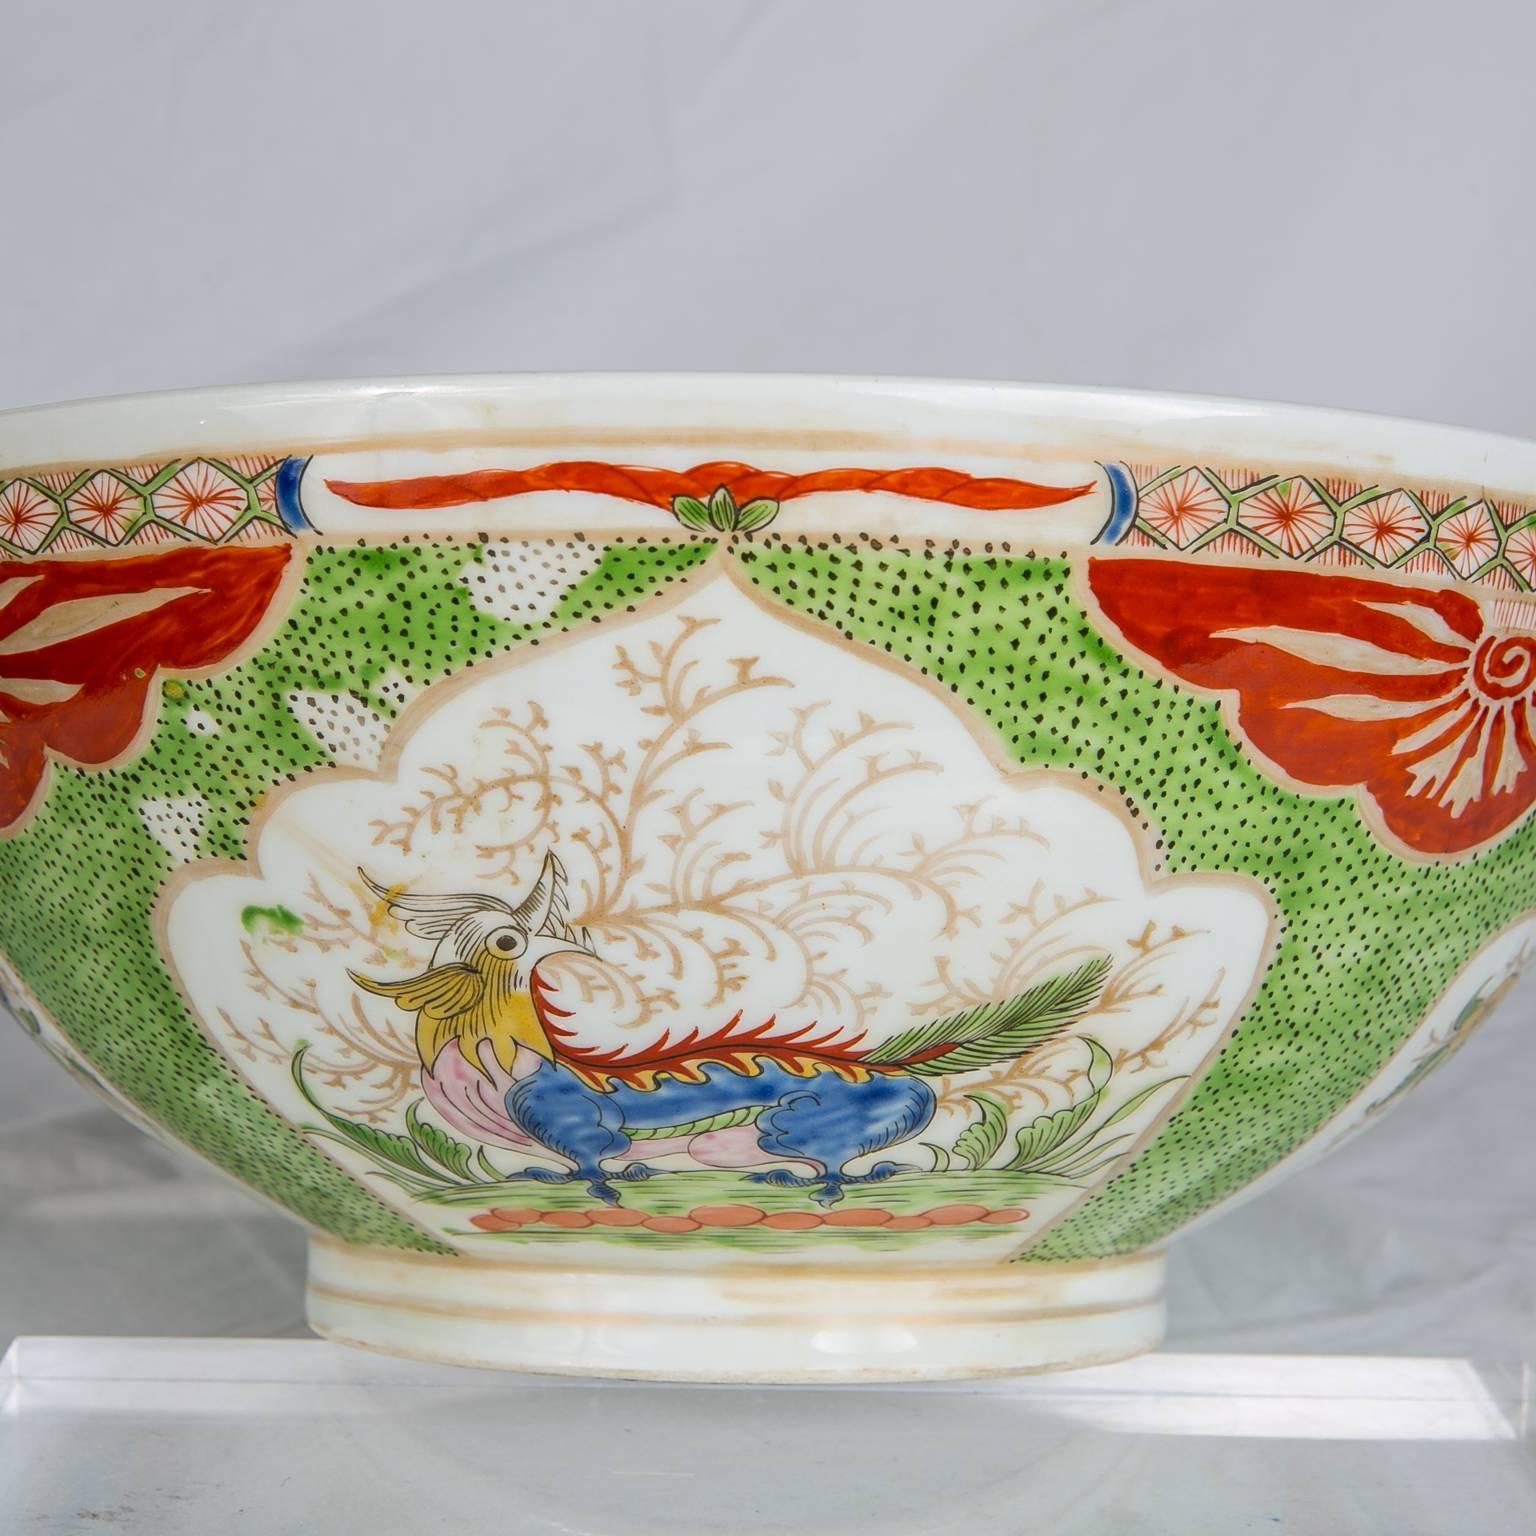 Antique  porcelain punch bowl painted in the Bengal Tiger pattern also known as the "Dragon in Compartments " pattern. The exterior of this exceptional bowl features four panels alternating between dragons and the objects of good fortune